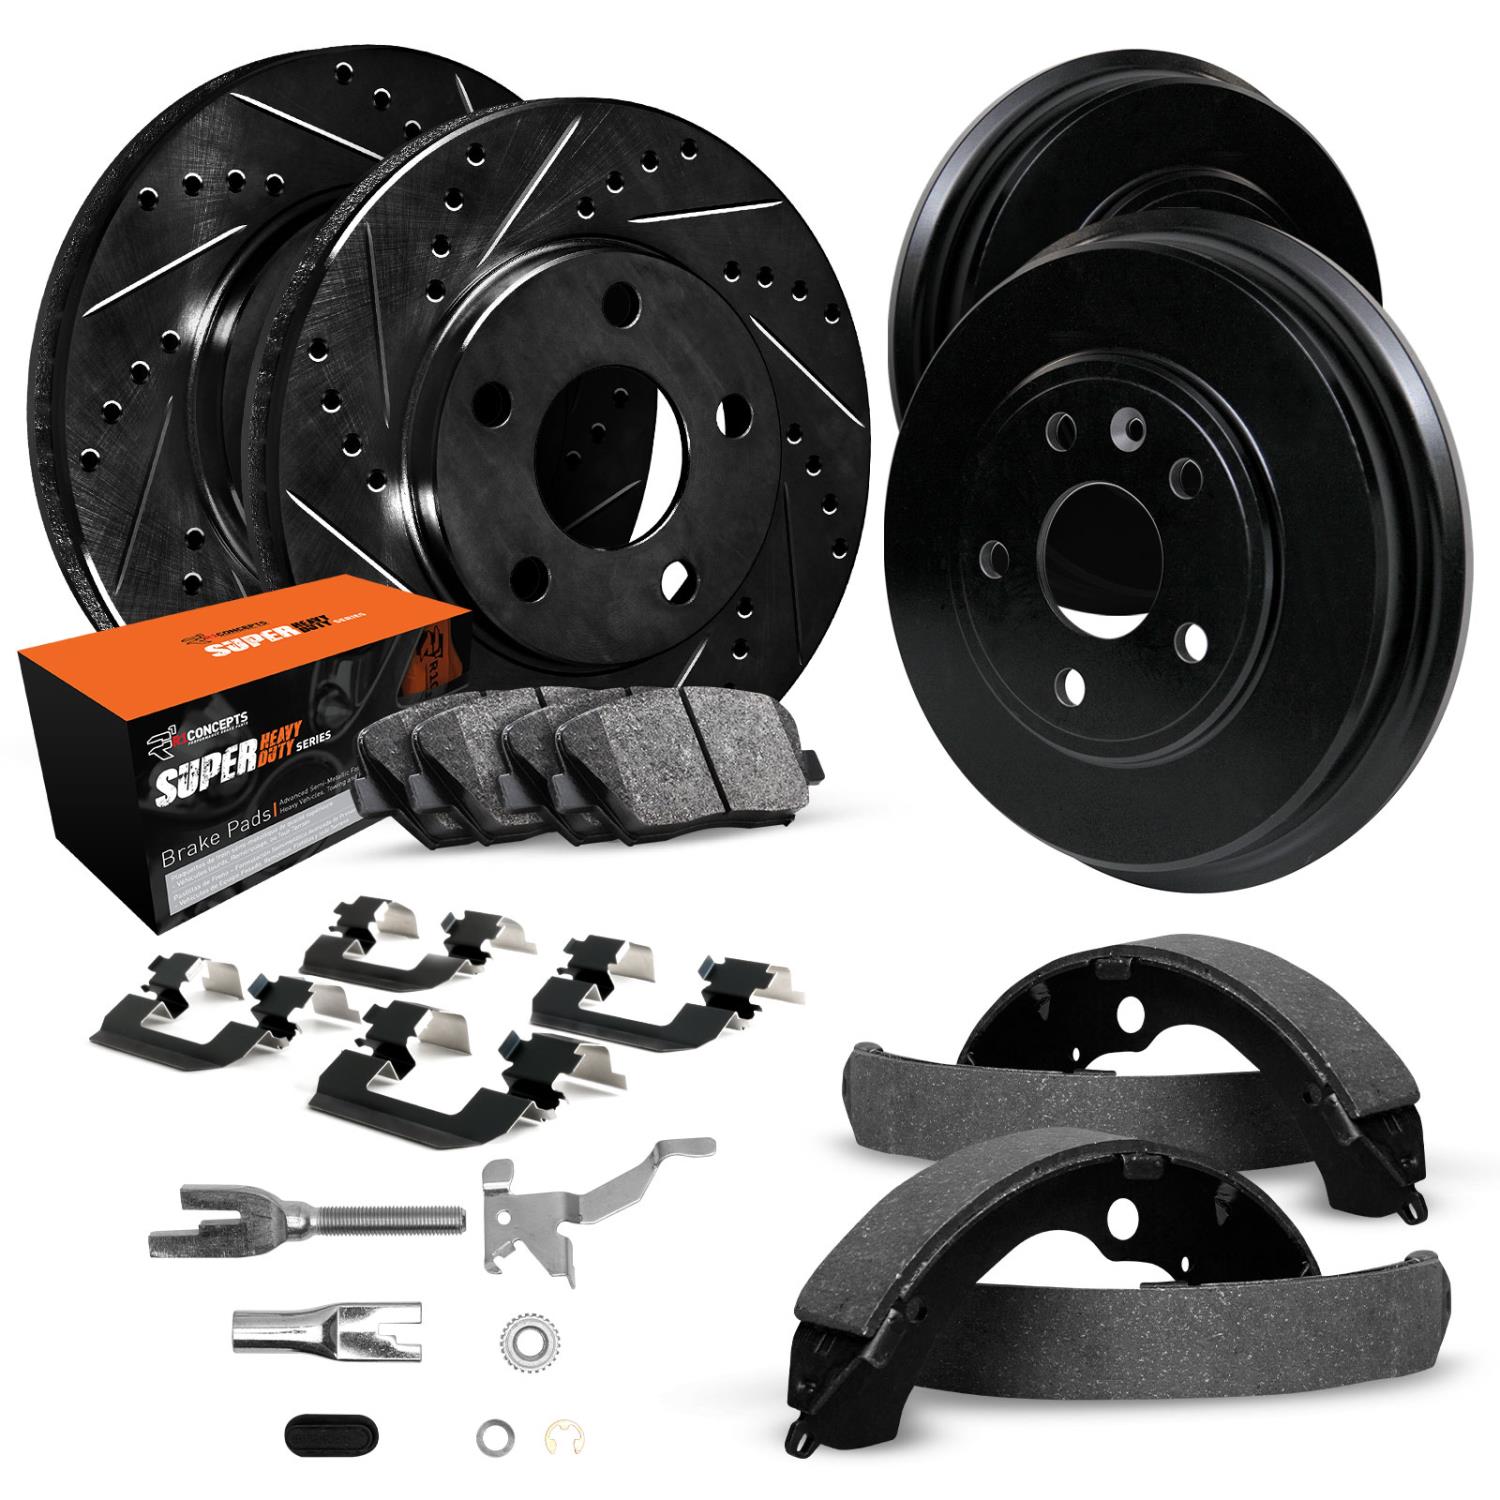 E-Line Drilled/Slotted Black Rotor & Drum Set w/Super-Duty Pads, Shoes, Hardware/Adjusters, 1994-1996 Ford/Lincoln/Mercury/Mazda